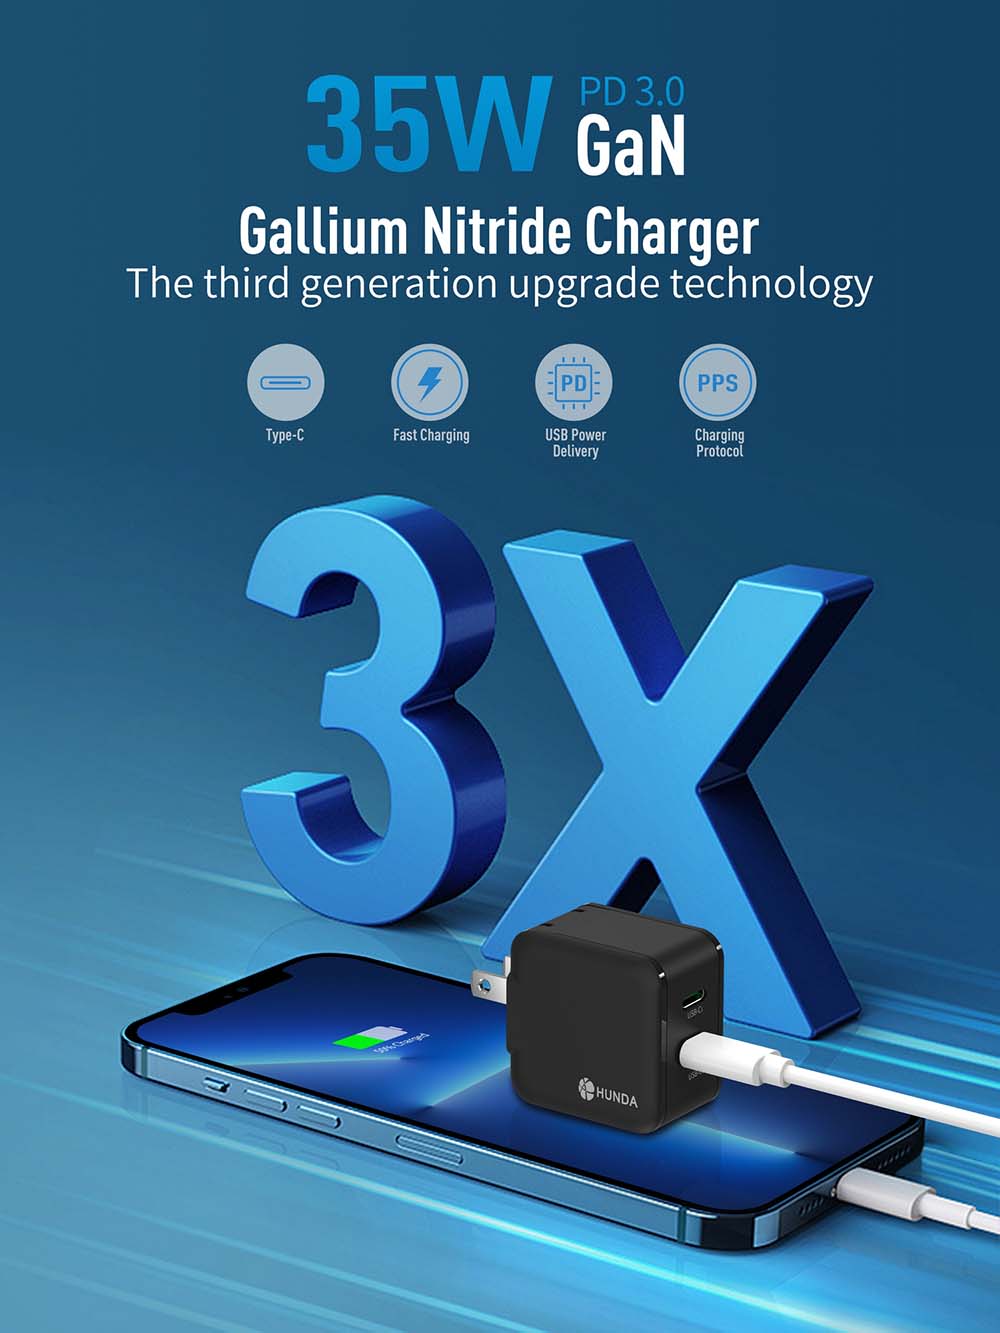 A2216-2(35W) dual usb c GaN charger 3x faster than other chargers